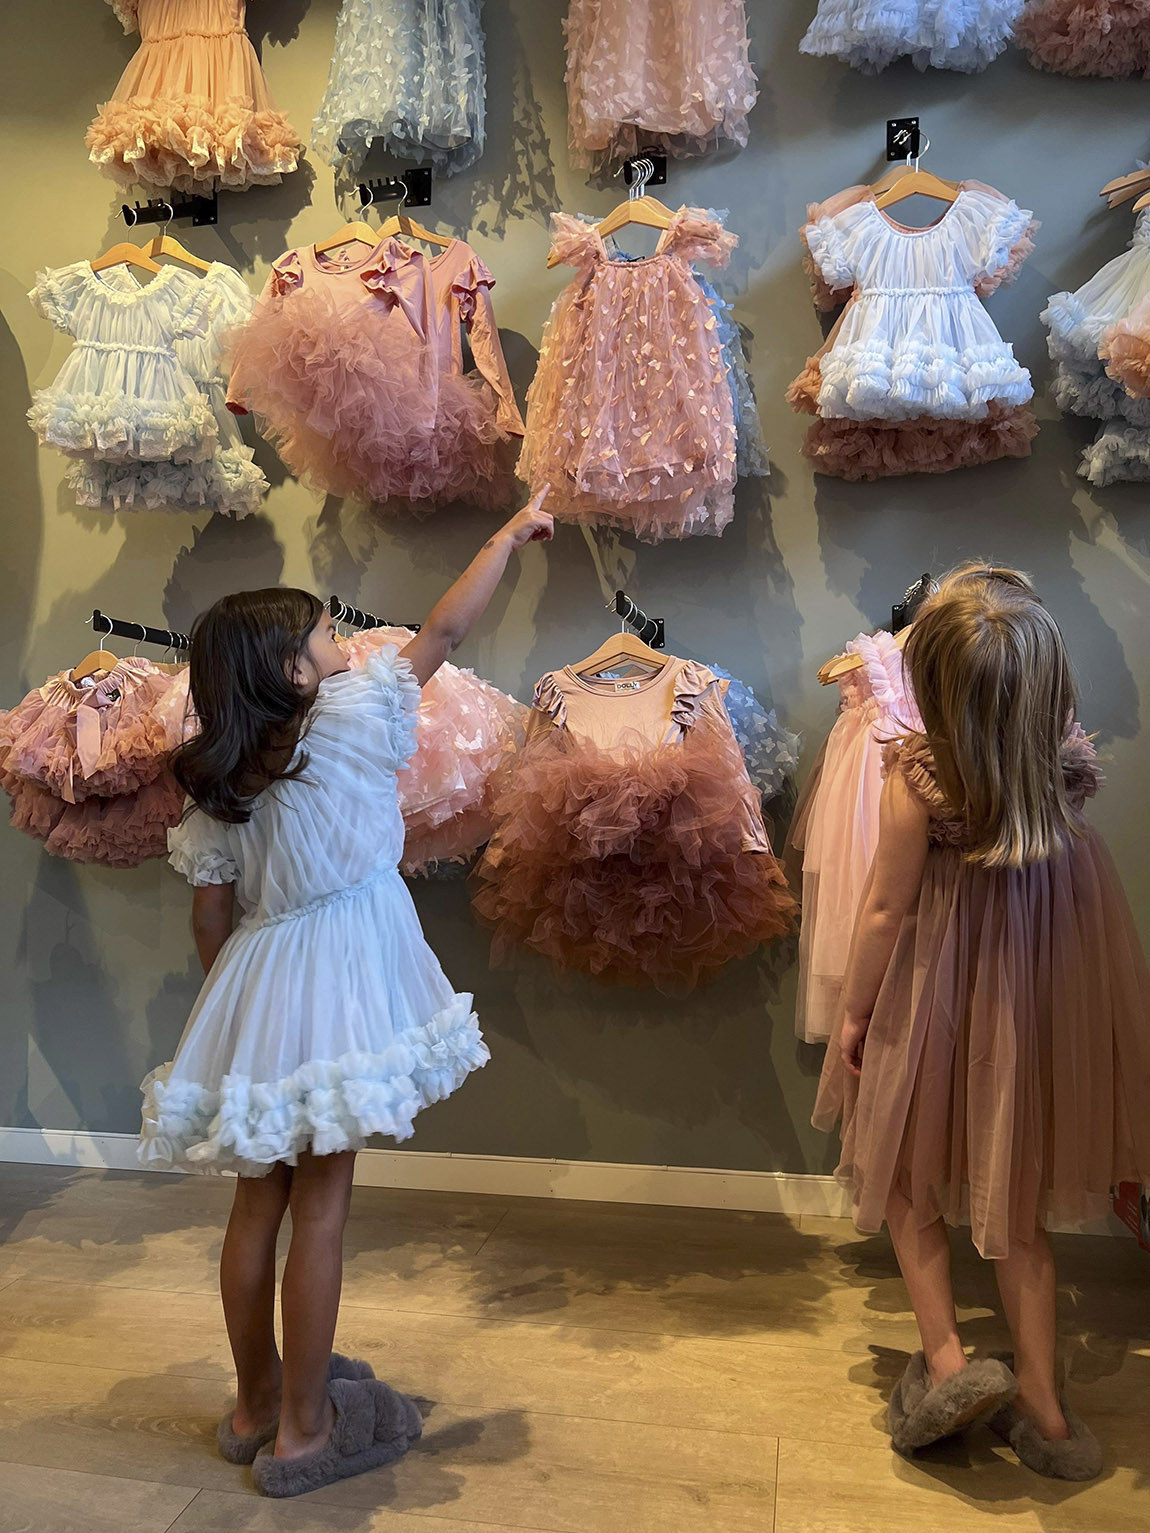 SIRKUS REBELL: Much more than a children’s boutique